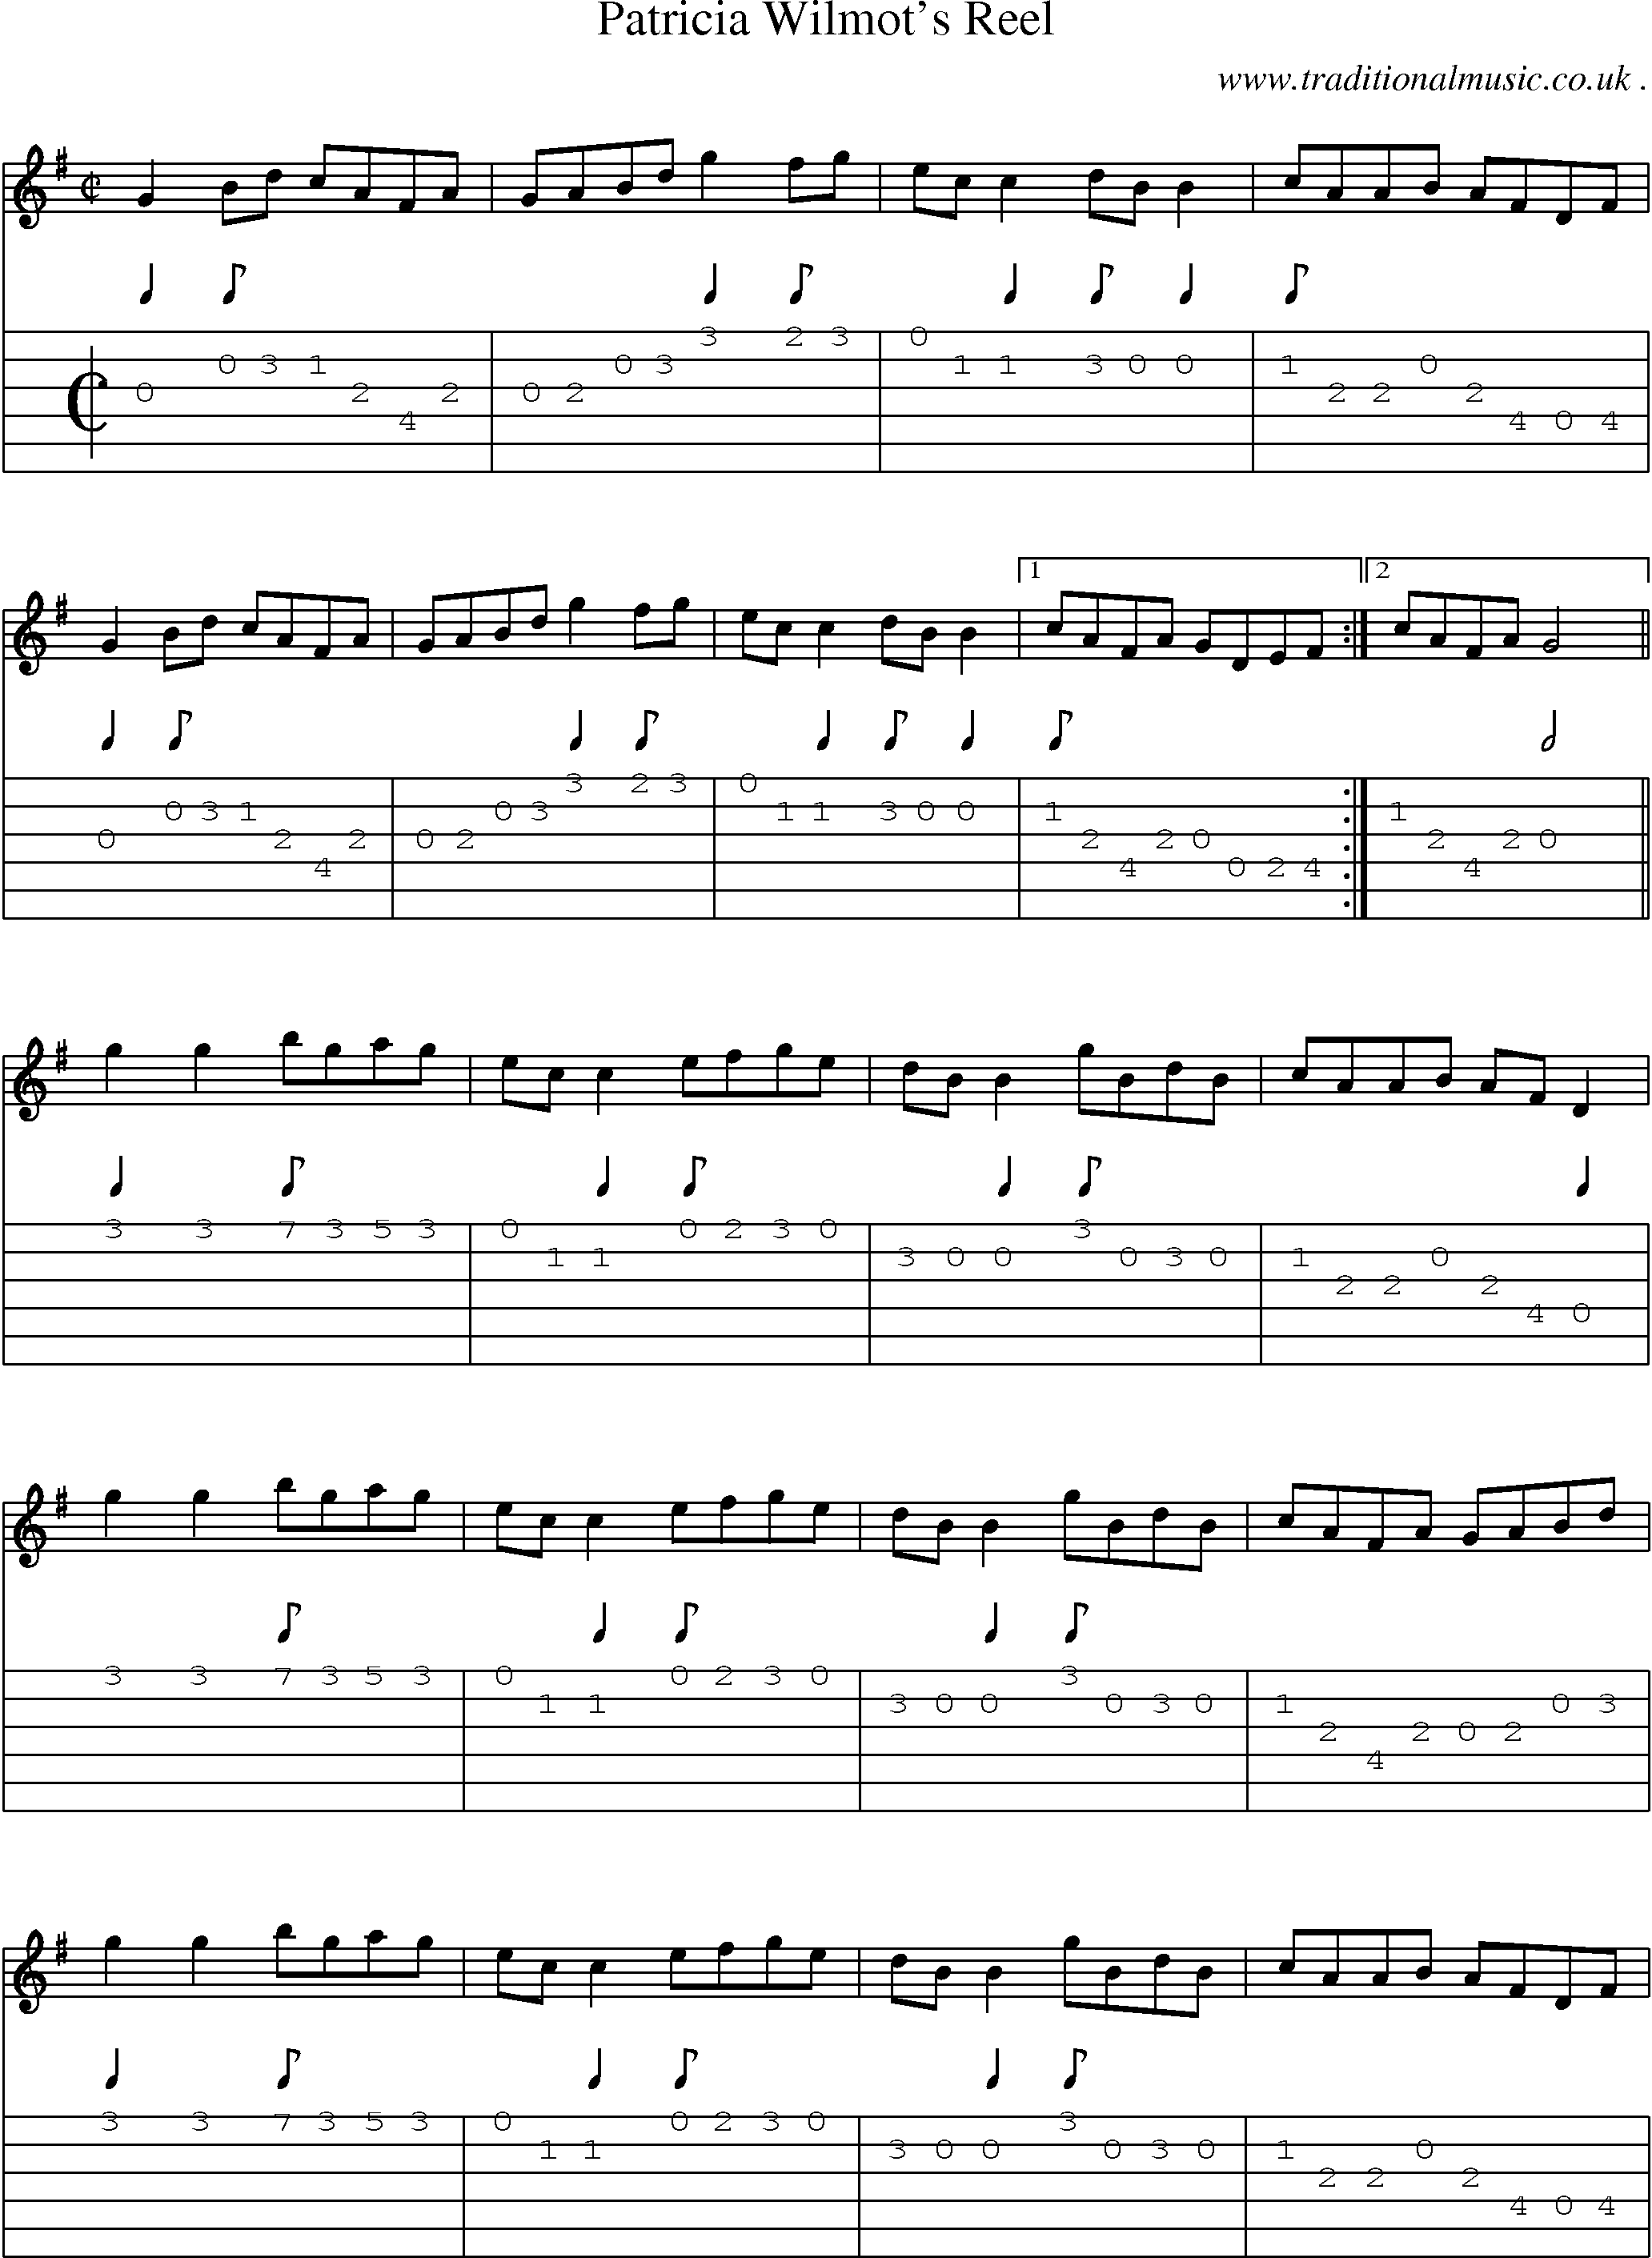 Sheet-Music and Guitar Tabs for Patricia Wilmots Reel